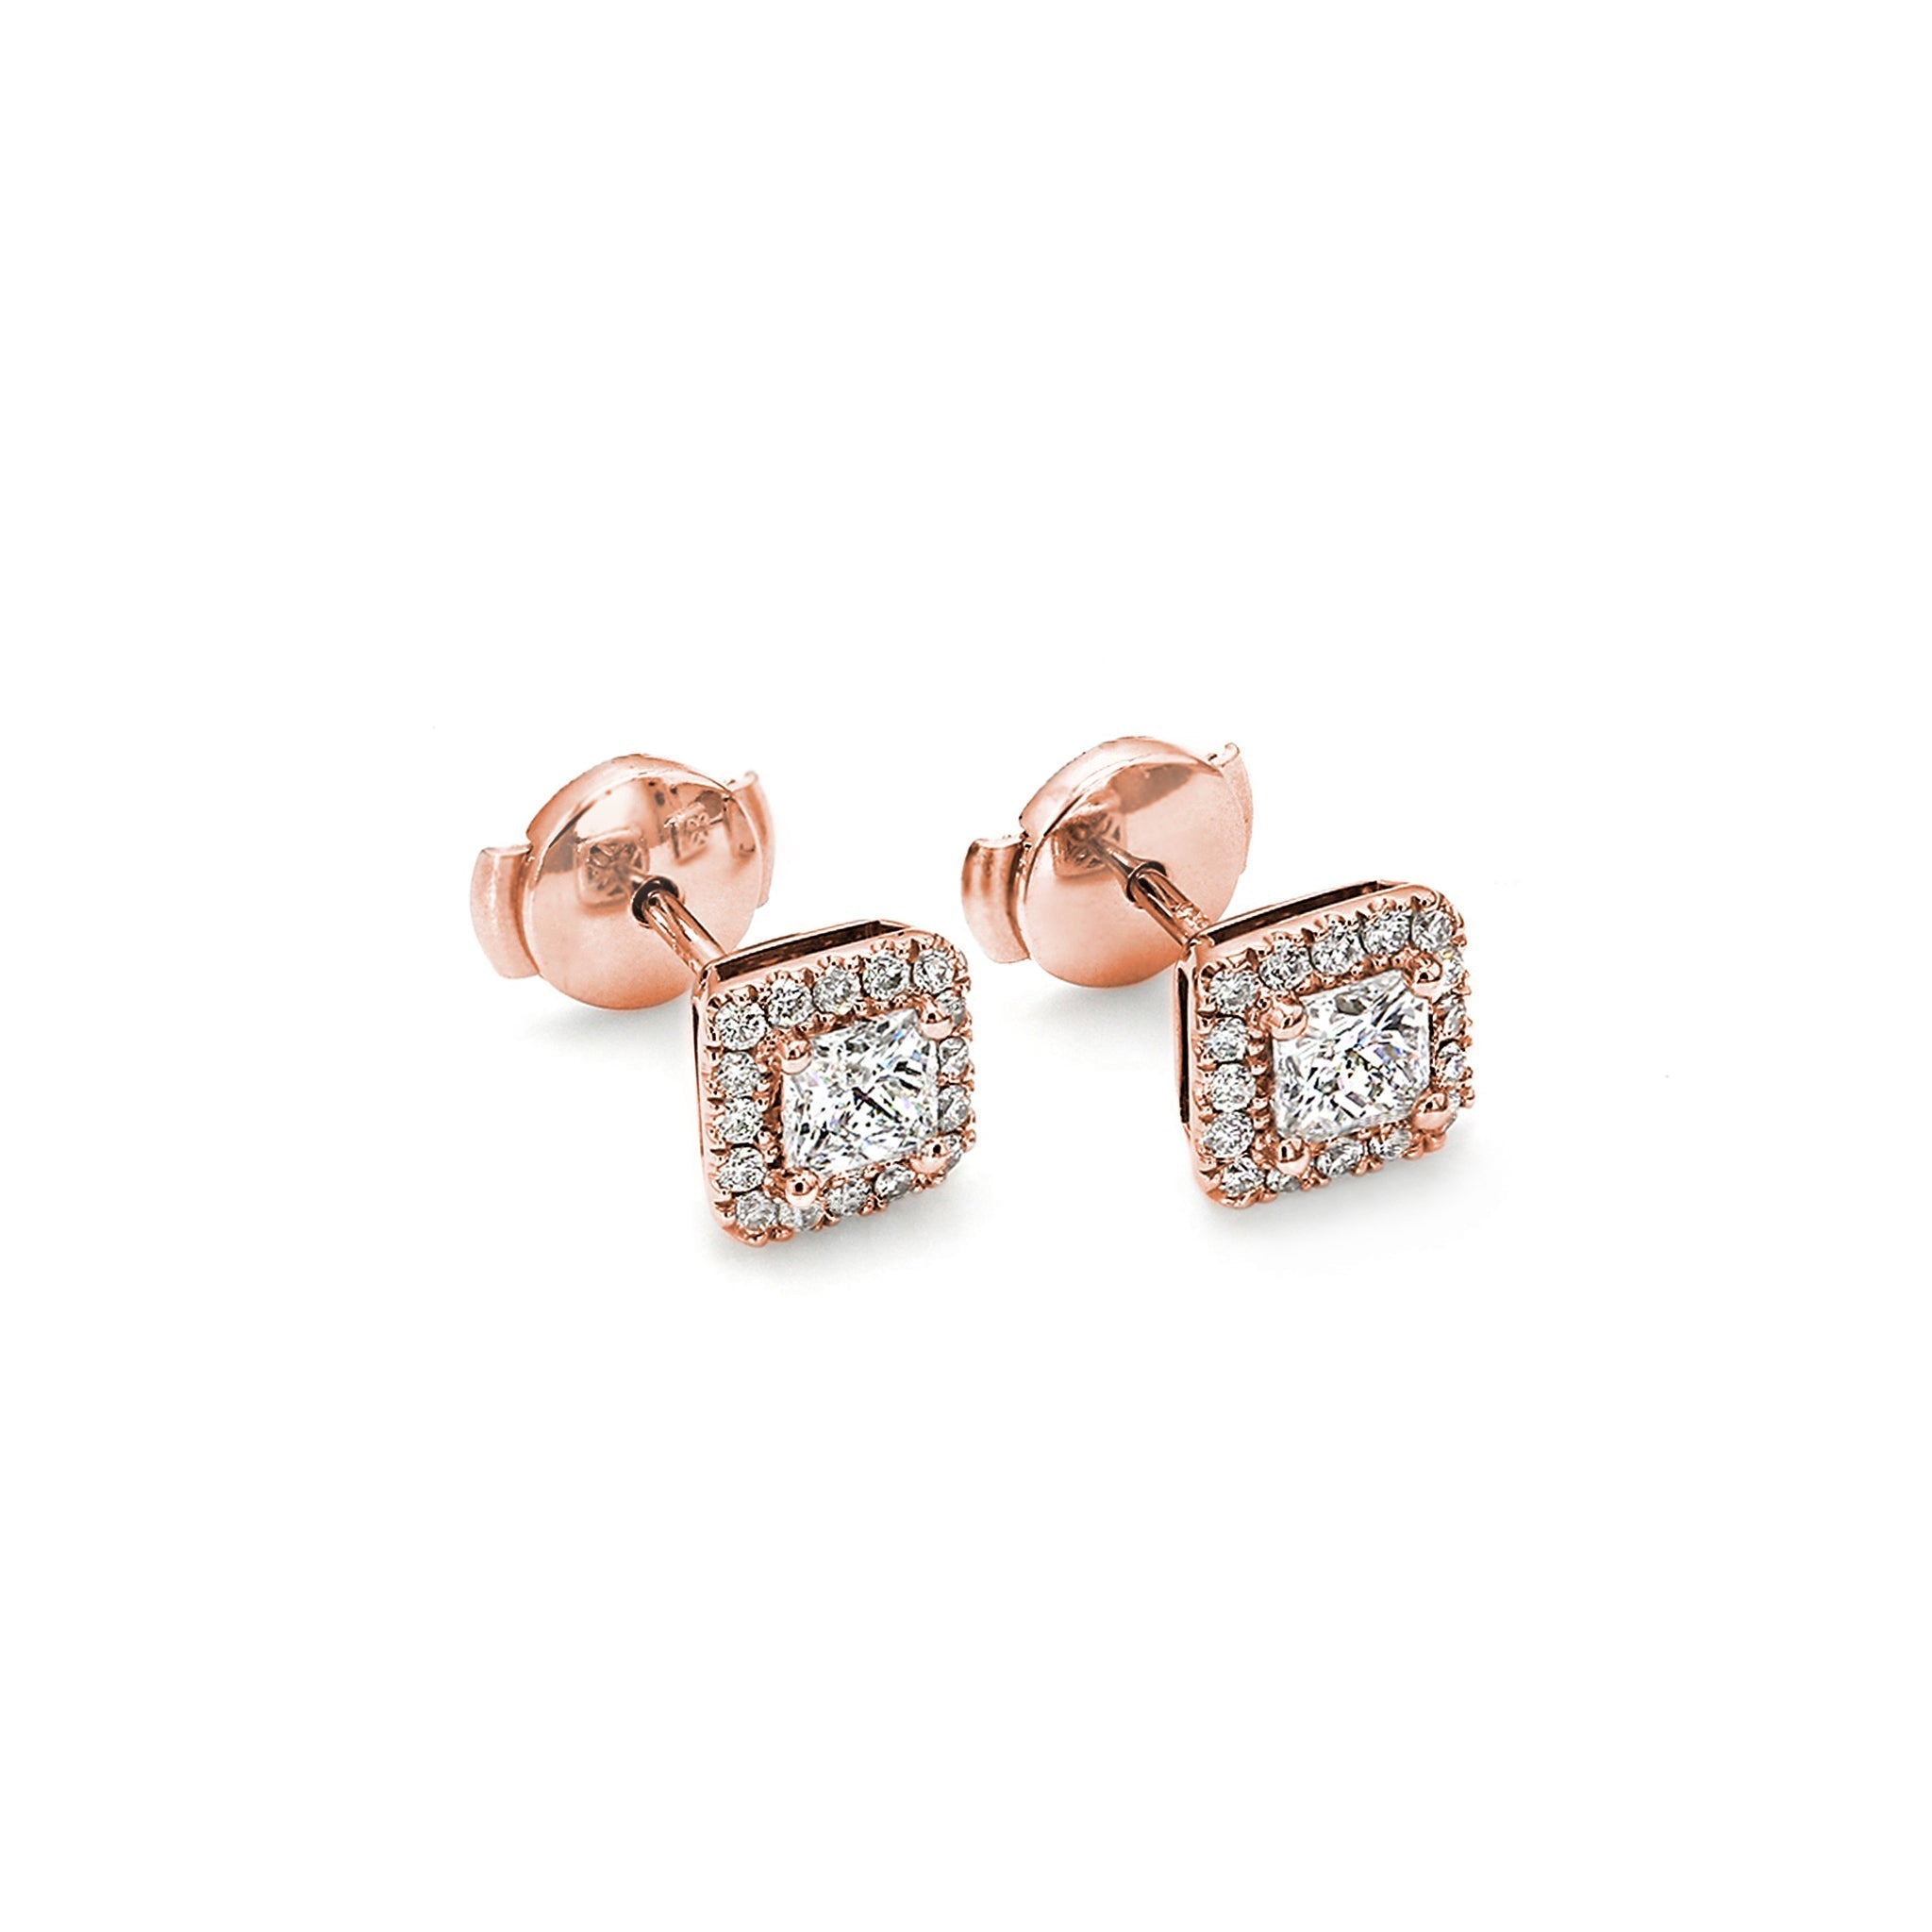 Shimansky - My Girl Diamond Halo Earrings 0.40 Carat Crafted in 18K Rose Gold 3D View